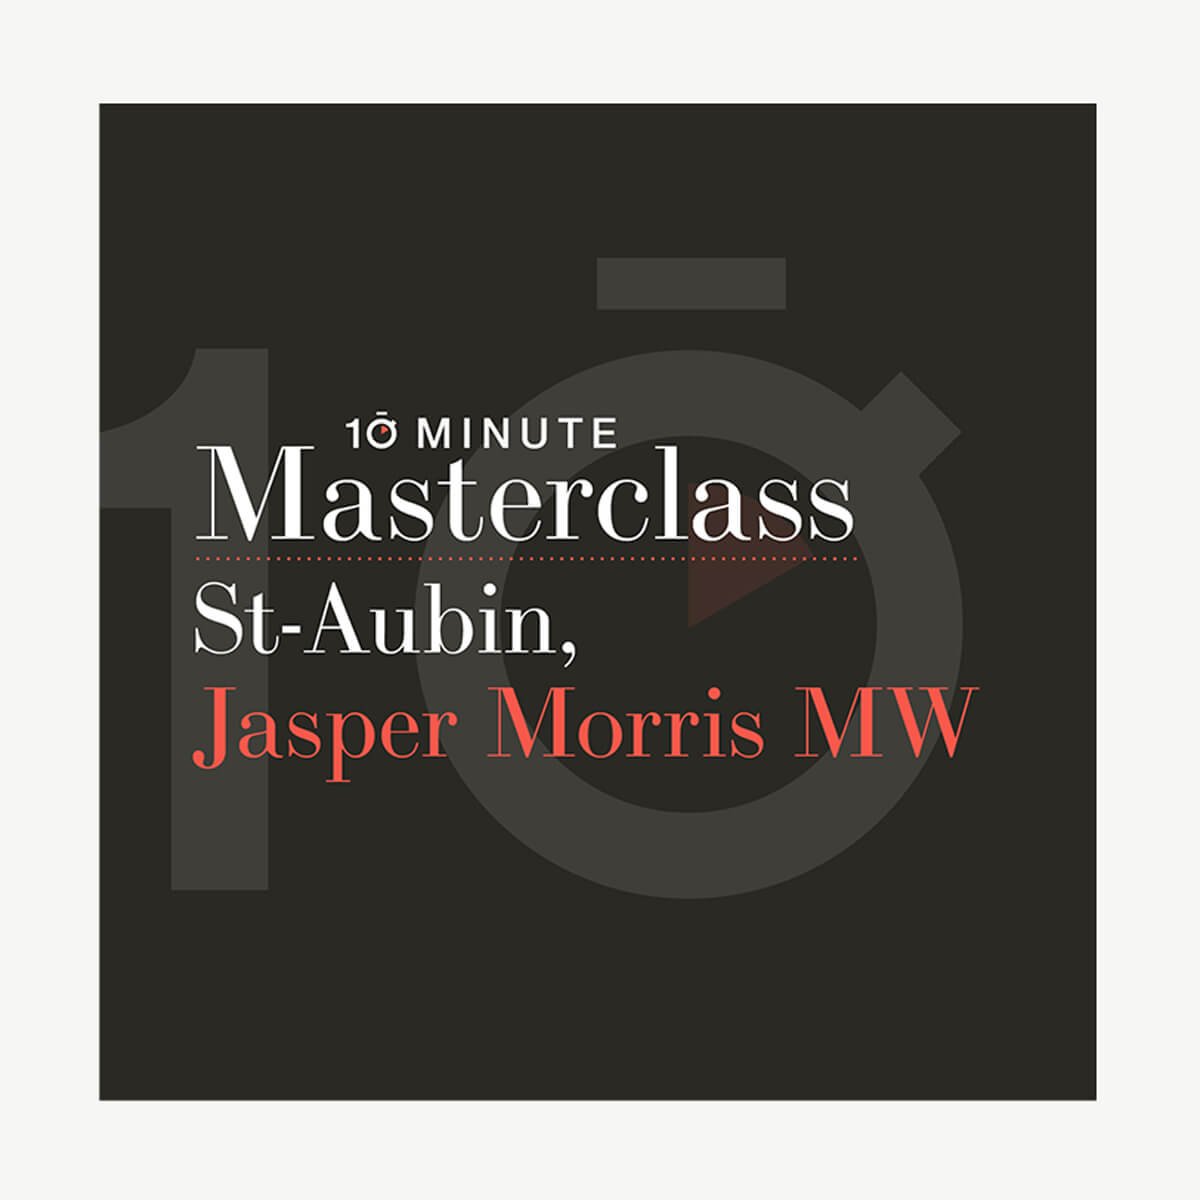 ▻ St-Aubin with Jasper Morris MW: Jasper Morris MW, today’s leading Burgundy expert and author of the award-winning book “Inside Burgundy”, conducts a 10-Minute Masterclass on St-Aubin, the fourth great white… bit.ly/4d9v4XI by @thewineconv #podcast #vino #wine